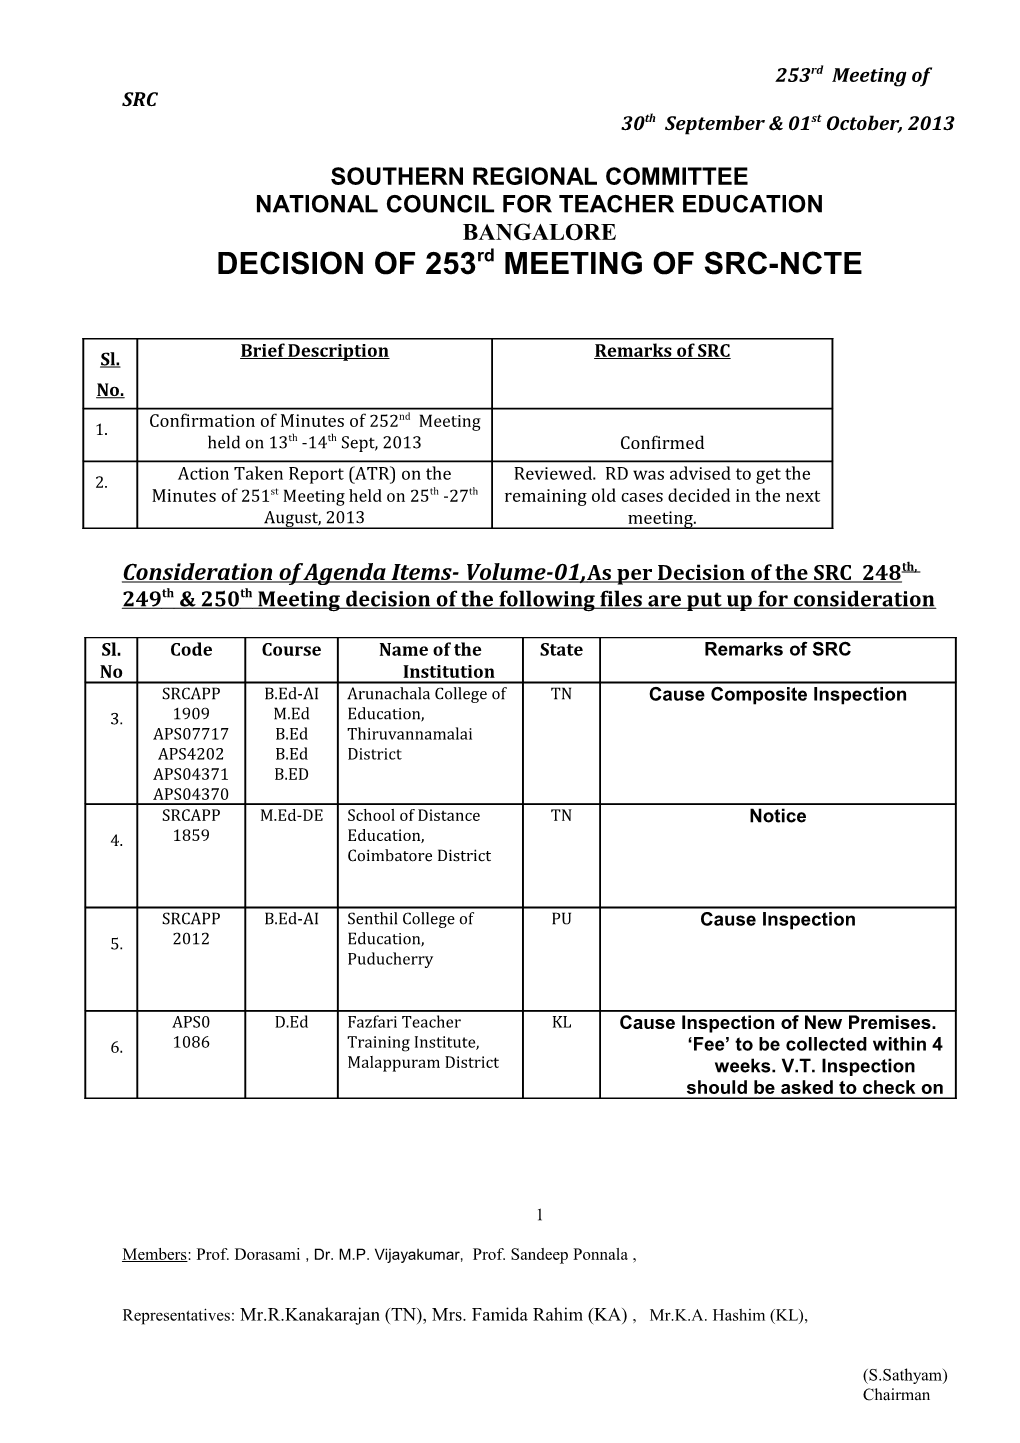 SUMMARY of 253Rd MEETING of SRC-NCTE